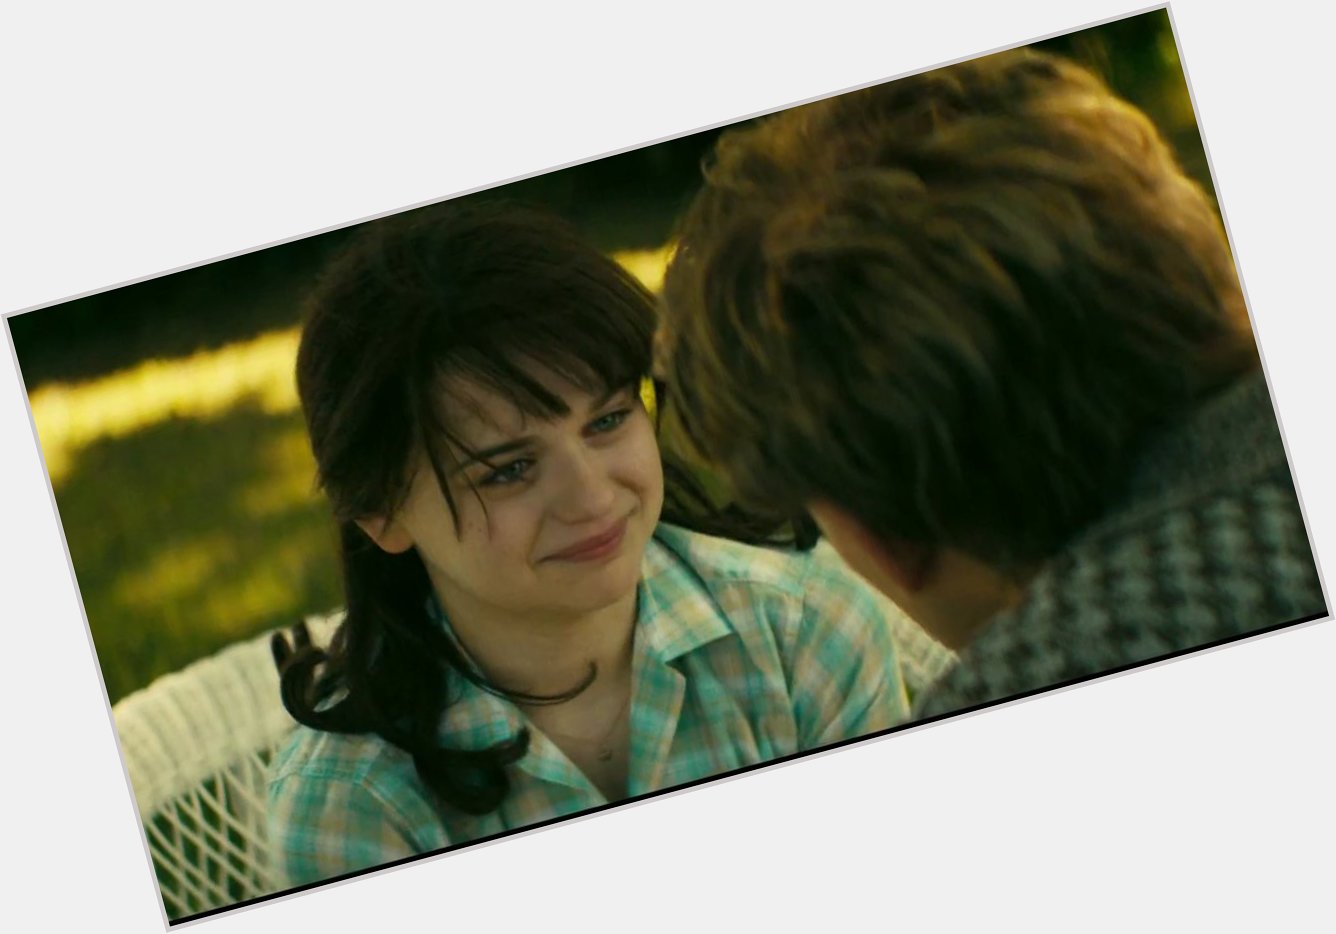 Happy Birthday Joey King (July 30)
Danny\s sister Phoebe in STONEWALL 
 